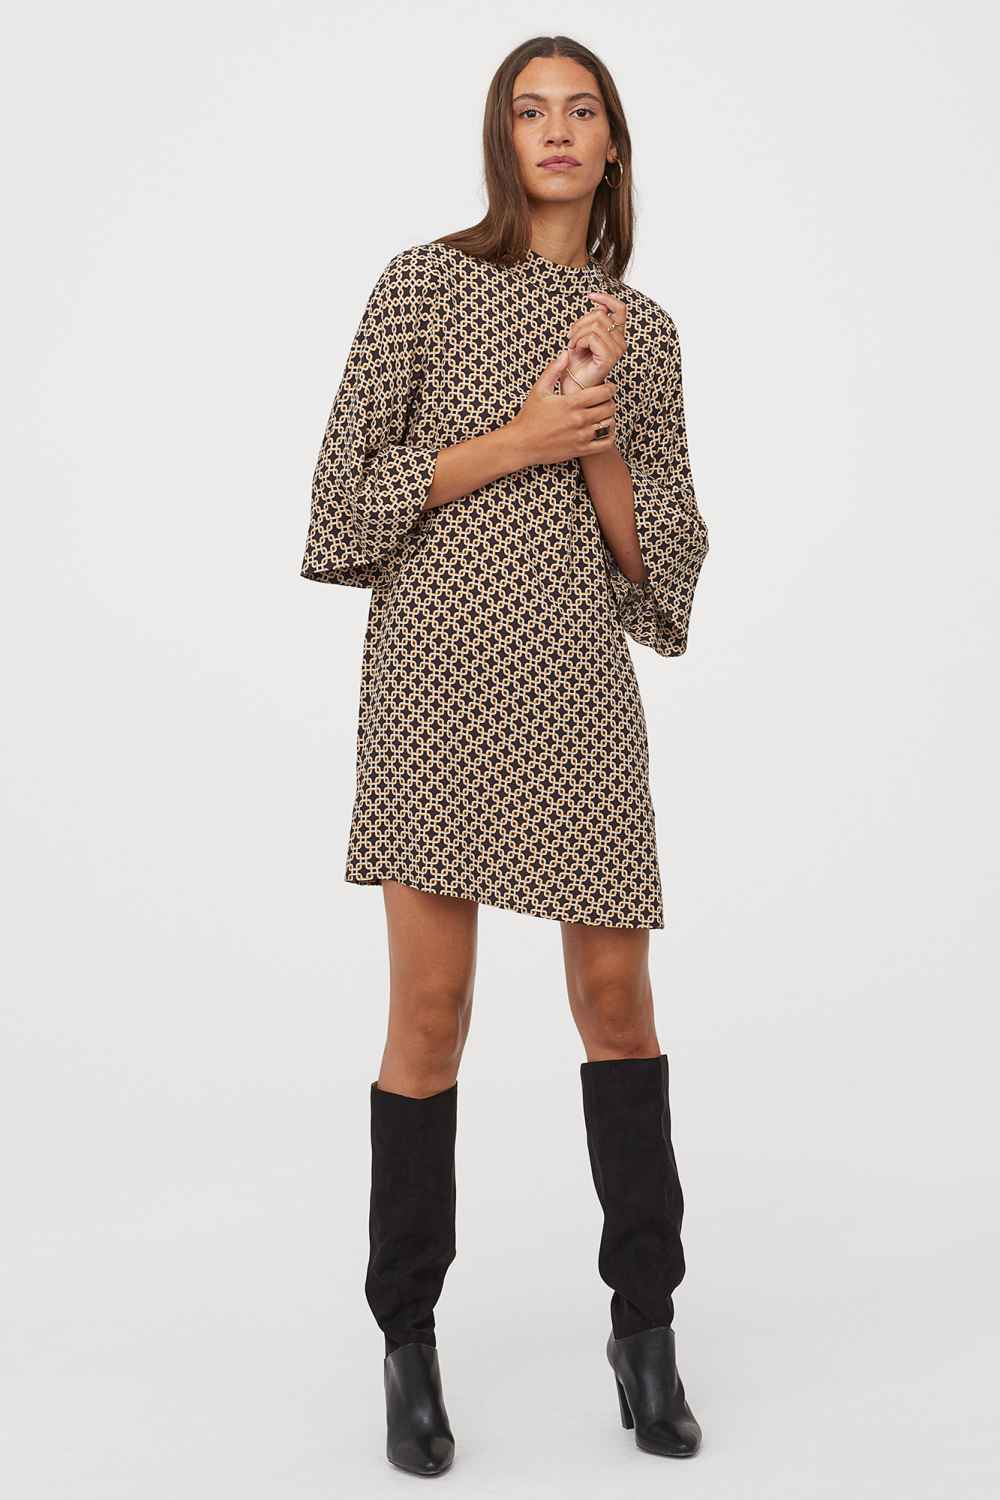 Richard Allan x H&M Collection, 1960s-Inspired Clothing: Pics | Us Weekly